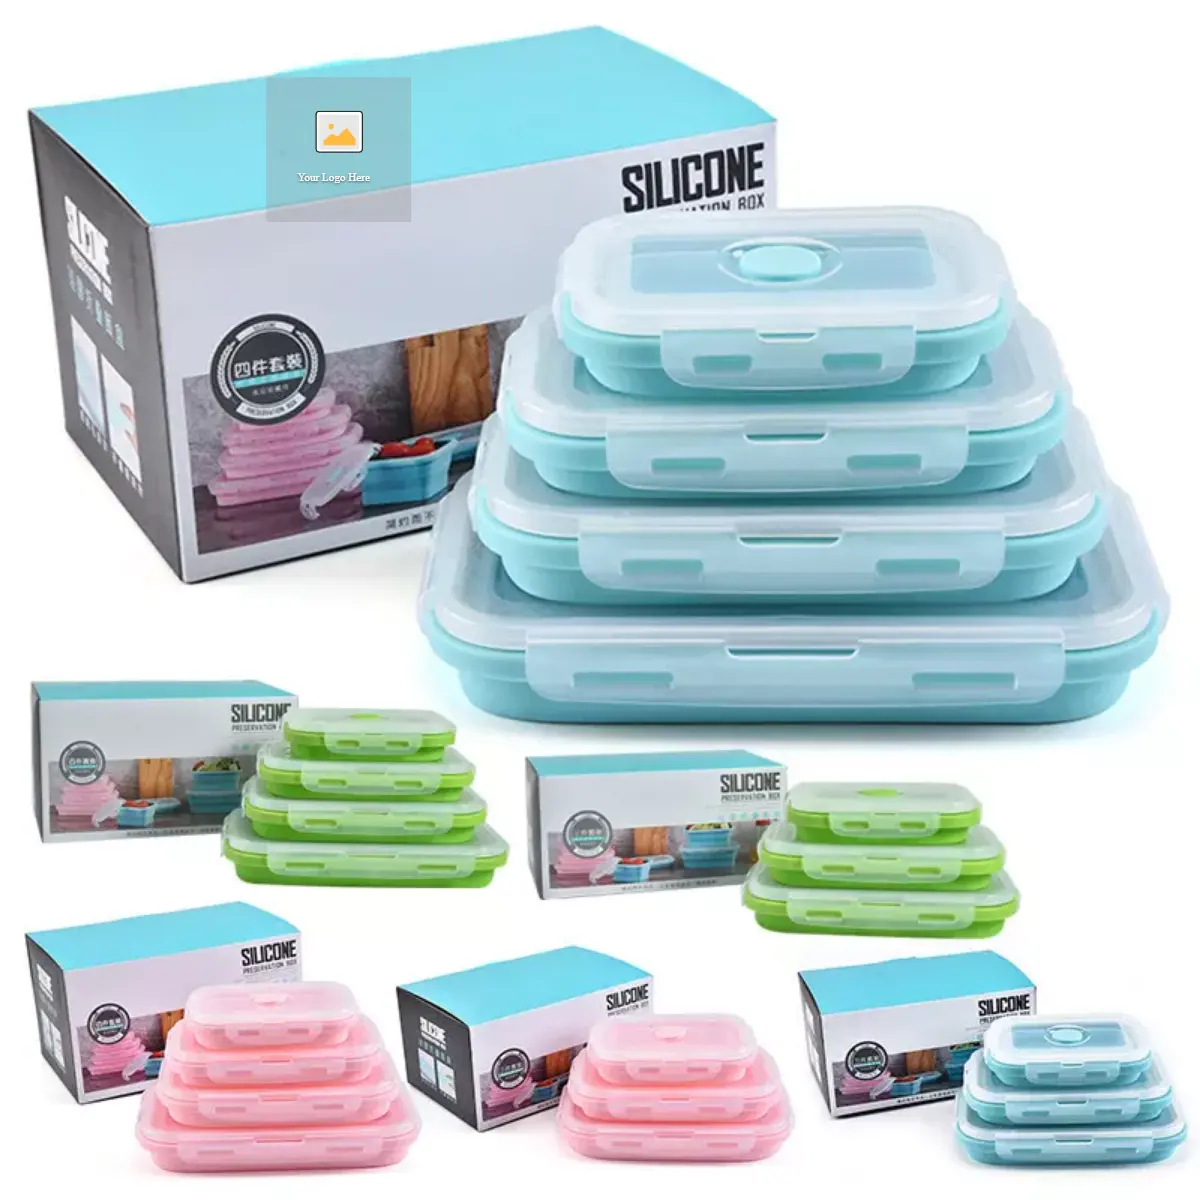 4 pieces/set Portable Folding Food Grade bento lunch box Collapsible Food Storage Container Kitchen Silicone Lunch Box